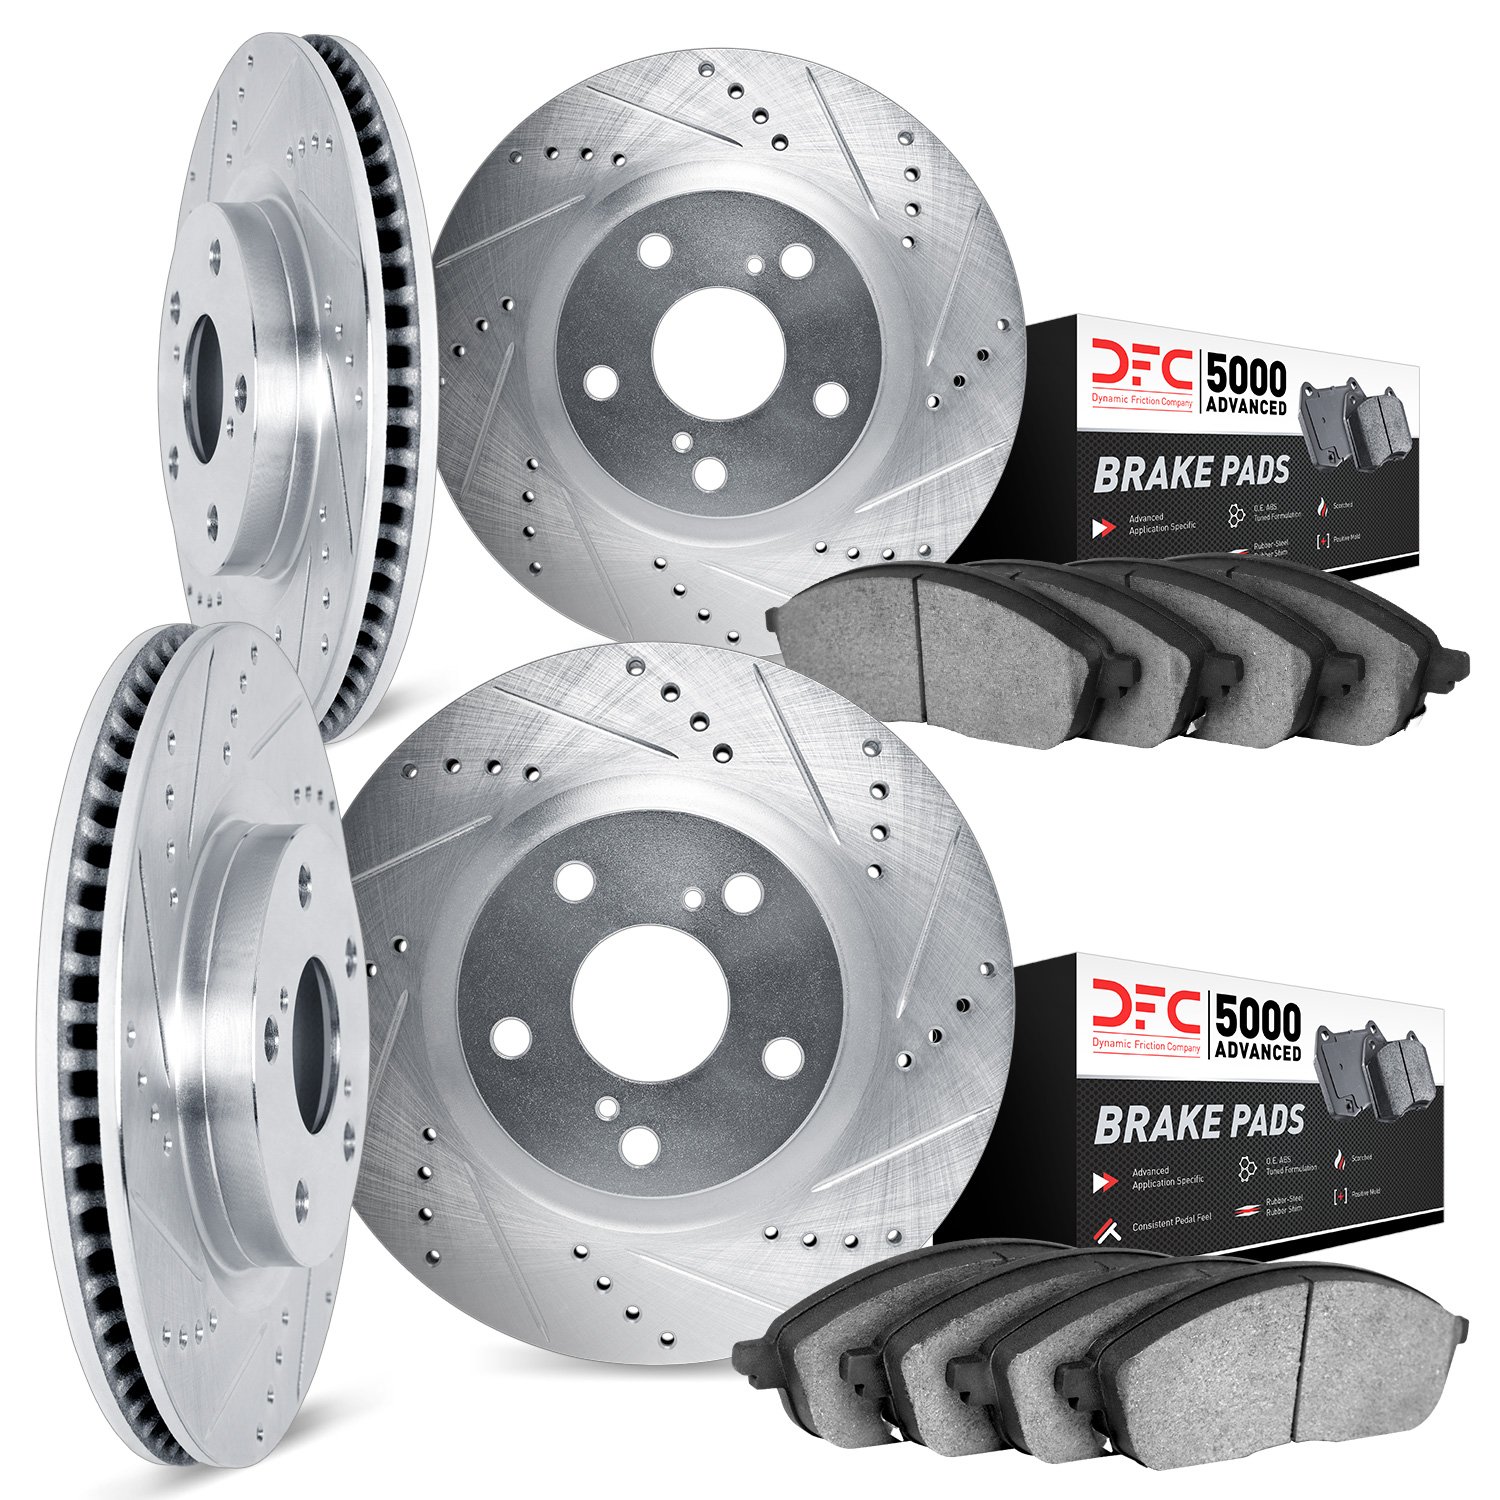 7504-54358 Drilled/Slotted Brake Rotors w/5000 Advanced Brake Pads Kit [Silver], 2004-2006 Ford/Lincoln/Mercury/Mazda, Position: